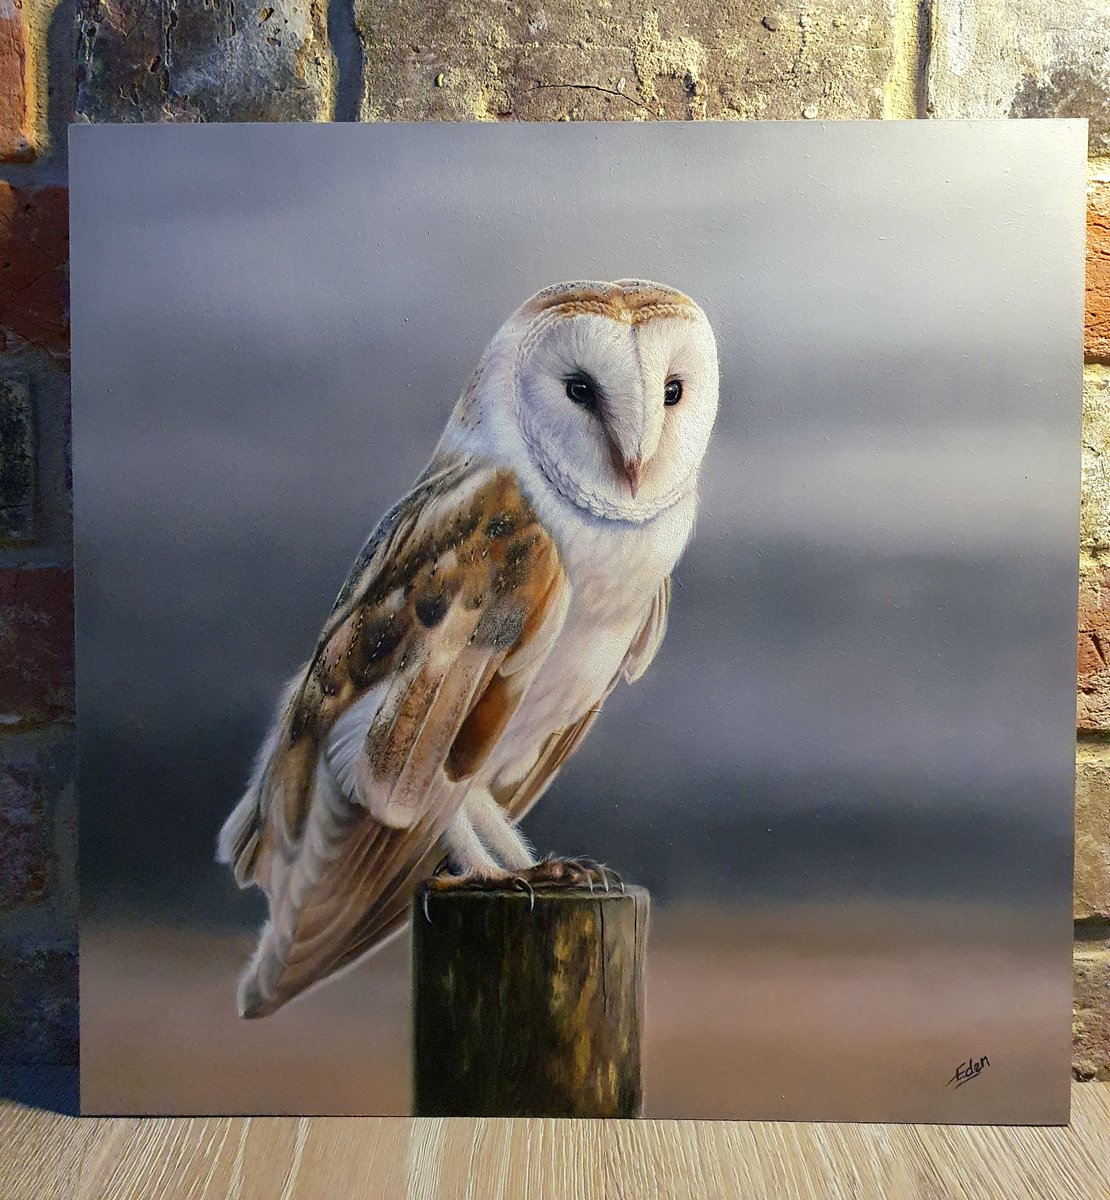 I feel as though the colours are a little more true to life on this image 🦉

#owl #owls #owlpainting #barnowl #barnowlsofinstagram #owlsofinstagram #owllover #animalartist #animalart #wildlife #birdlife #owldrawing #britishwildlife #birds #birdsofinstagram #birdsofprey